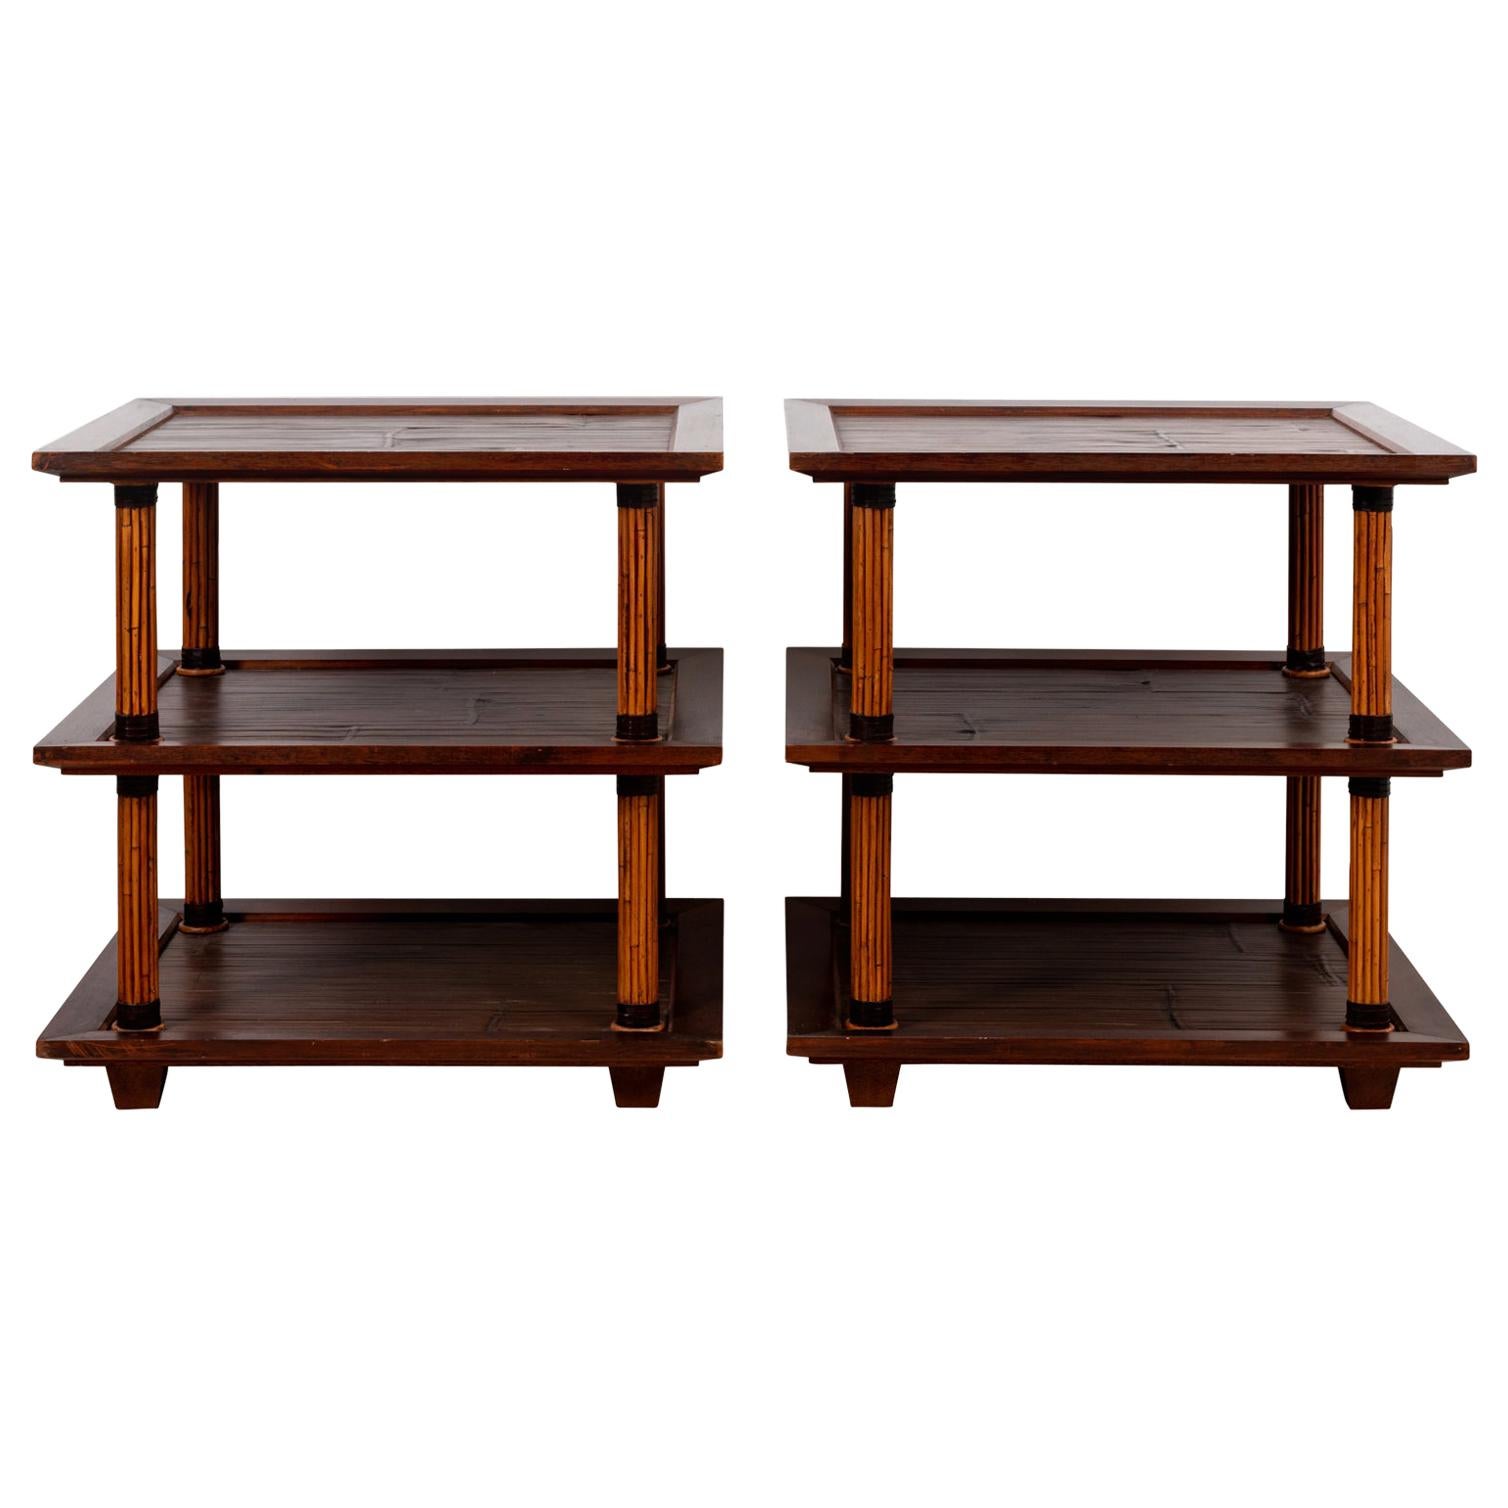 Pair of Two Tier Bamboo Tables